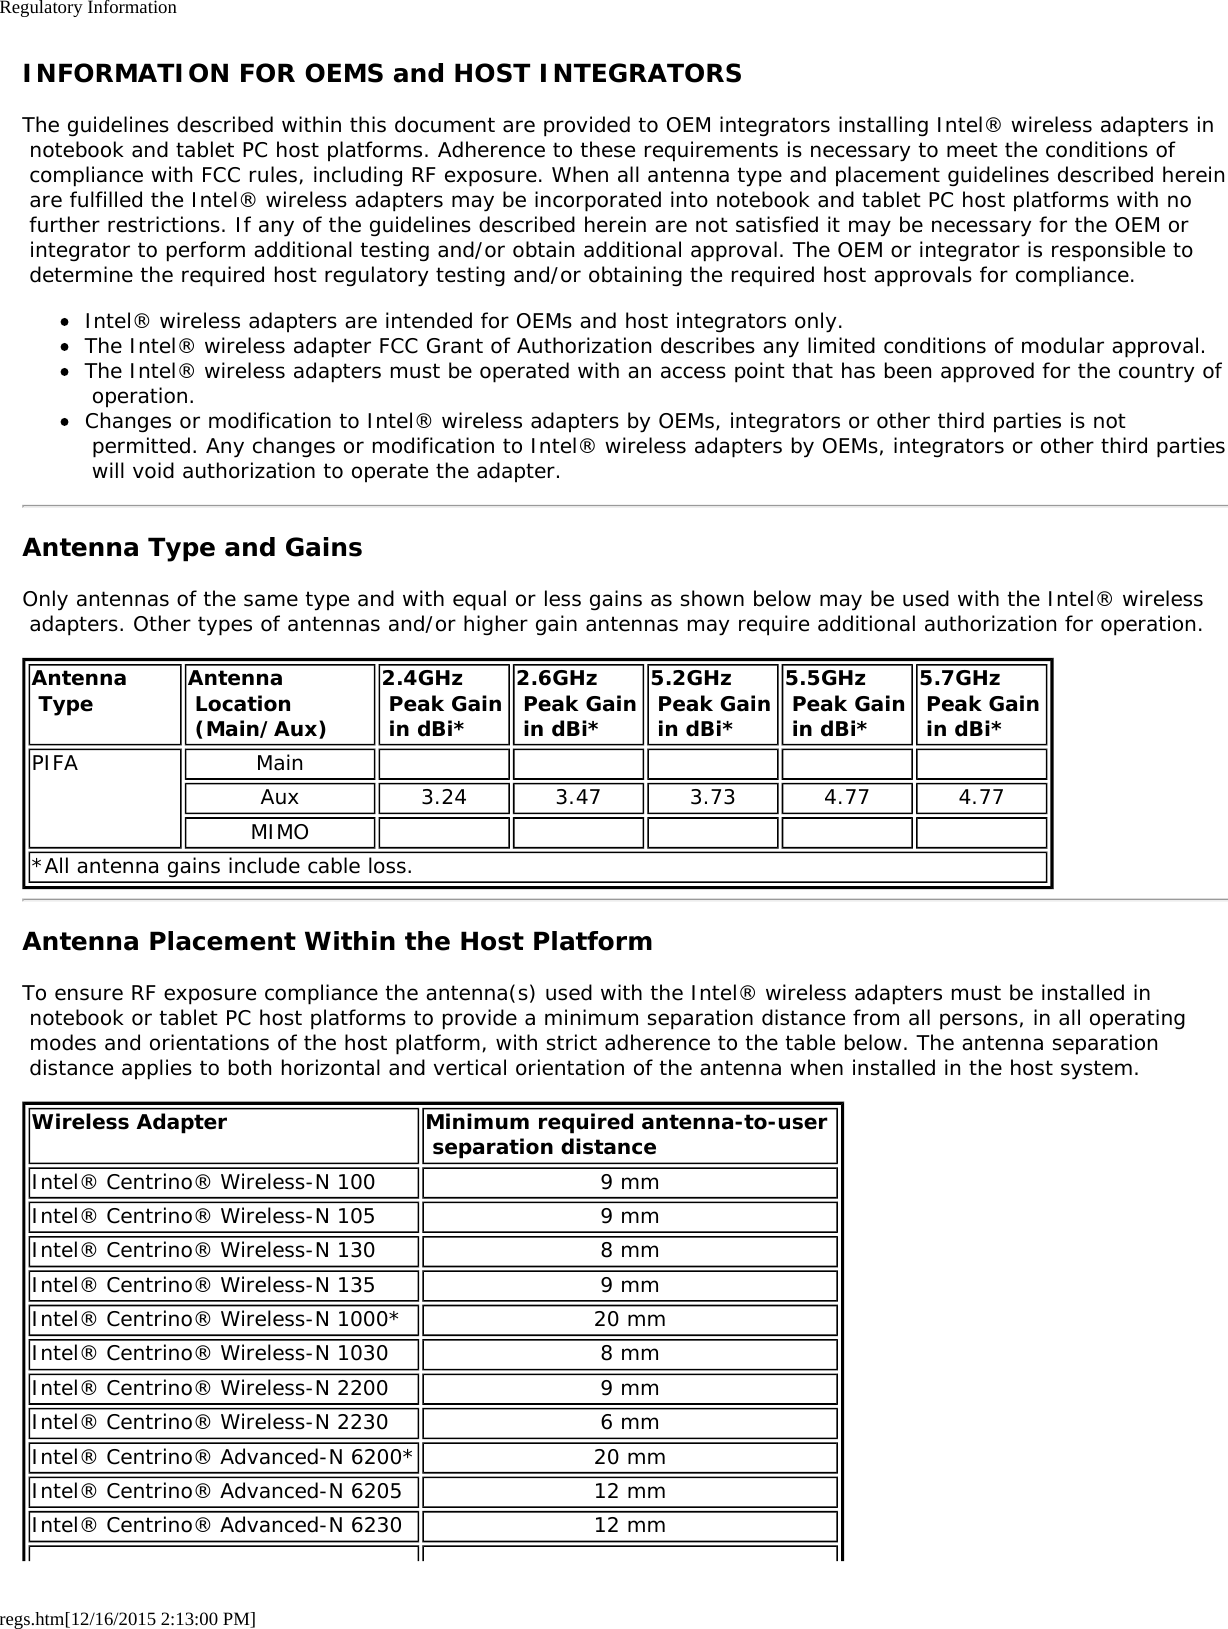 Regulatory Informationregs.htm[12/16/2015 2:13:00 PM]INFORMATION FOR OEMS and HOST INTEGRATORSThe guidelines described within this document are provided to OEM integrators installing Intel® wireless adapters in notebook and tablet PC host platforms. Adherence to these requirements is necessary to meet the conditions of compliance with FCC rules, including RF exposure. When all antenna type and placement guidelines described herein are fulfilled the Intel® wireless adapters may be incorporated into notebook and tablet PC host platforms with no further restrictions. If any of the guidelines described herein are not satisfied it may be necessary for the OEM or integrator to perform additional testing and/or obtain additional approval. The OEM or integrator is responsible to determine the required host regulatory testing and/or obtaining the required host approvals for compliance.Intel® wireless adapters are intended for OEMs and host integrators only.The Intel® wireless adapter FCC Grant of Authorization describes any limited conditions of modular approval.The Intel® wireless adapters must be operated with an access point that has been approved for the country of operation.Changes or modification to Intel® wireless adapters by OEMs, integrators or other third parties is not permitted. Any changes or modification to Intel® wireless adapters by OEMs, integrators or other third parties will void authorization to operate the adapter.Antenna Type and GainsOnly antennas of the same type and with equal or less gains as shown below may be used with the Intel® wireless adapters. Other types of antennas and/or higher gain antennas may require additional authorization for operation.Antenna Type Antenna Location (Main/Aux)2.4GHz Peak Gain in dBi*2.6GHz Peak Gain in dBi*5.2GHz Peak Gain in dBi*5.5GHz Peak Gain in dBi*5.7GHz  Peak Gain in dBi*PIFA MainAux 3.24 3.47 3.73 4.77 4.77MIMO*All antenna gains include cable loss.Antenna Placement Within the Host PlatformTo ensure RF exposure compliance the antenna(s) used with the Intel® wireless adapters must be installed in notebook or tablet PC host platforms to provide a minimum separation distance from all persons, in all operating modes and orientations of the host platform, with strict adherence to the table below. The antenna separation distance applies to both horizontal and vertical orientation of the antenna when installed in the host system.Wireless Adapter Minimum required antenna-to-user  separation distanceIntel® Centrino® Wireless-N 100 9 mmIntel® Centrino® Wireless-N 105 9 mmIntel® Centrino® Wireless-N 130 8 mmIntel® Centrino® Wireless-N 135 9 mmIntel® Centrino® Wireless-N 1000* 20 mmIntel® Centrino® Wireless-N 1030 8 mmIntel® Centrino® Wireless-N 2200 9 mmIntel® Centrino® Wireless-N 2230 6 mmIntel® Centrino® Advanced-N 6200* 20 mmIntel® Centrino® Advanced-N 6205 12 mmIntel® Centrino® Advanced-N 6230 12 mm